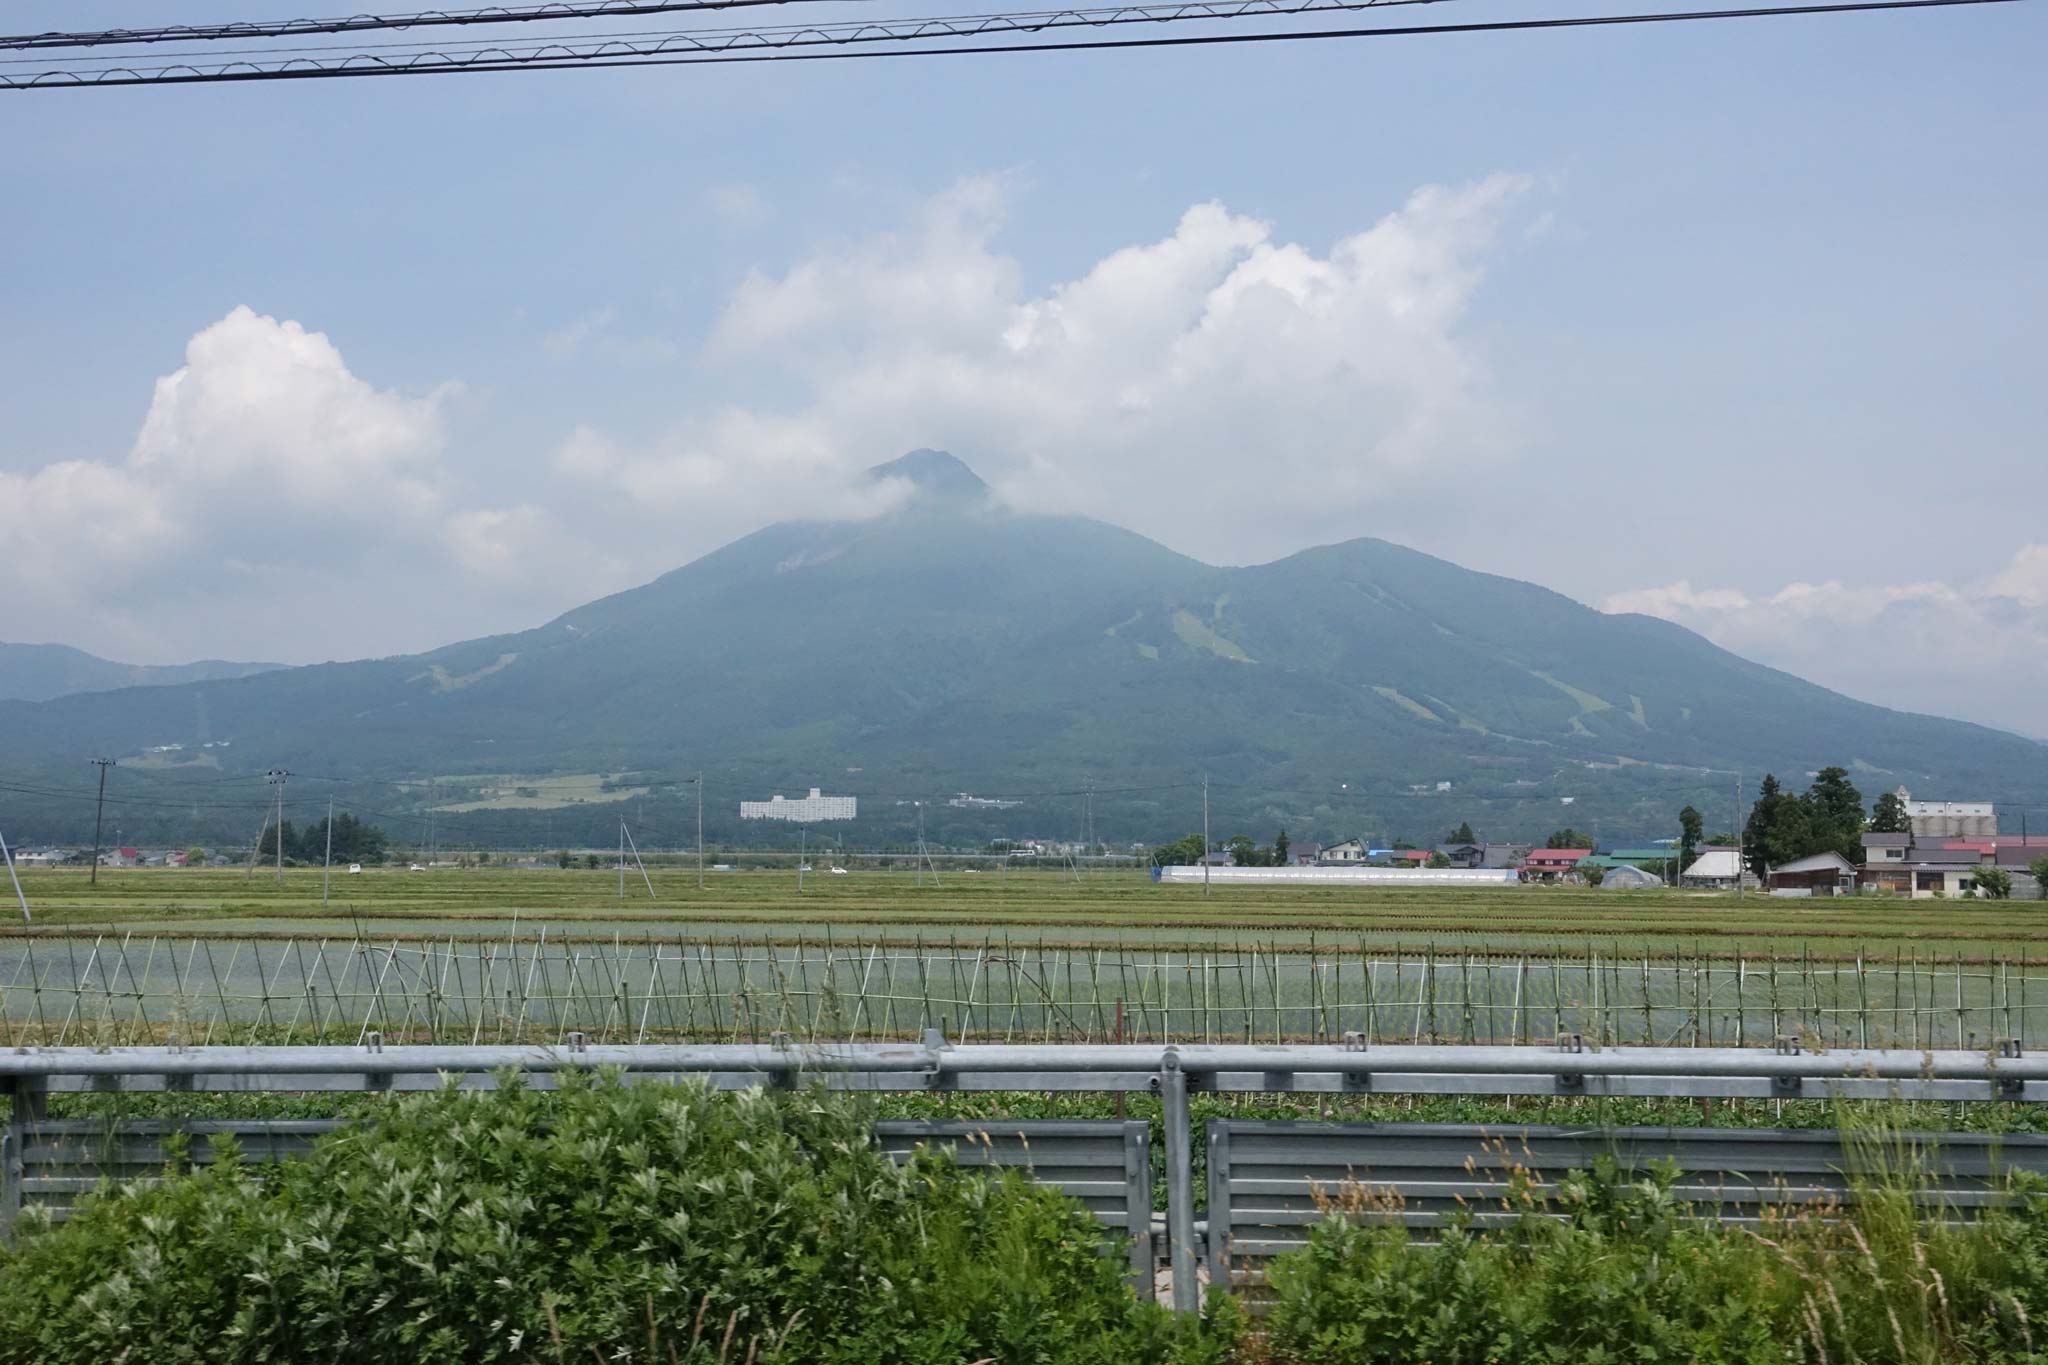 Mt. Bandai rising to 5,968' above the rice fields